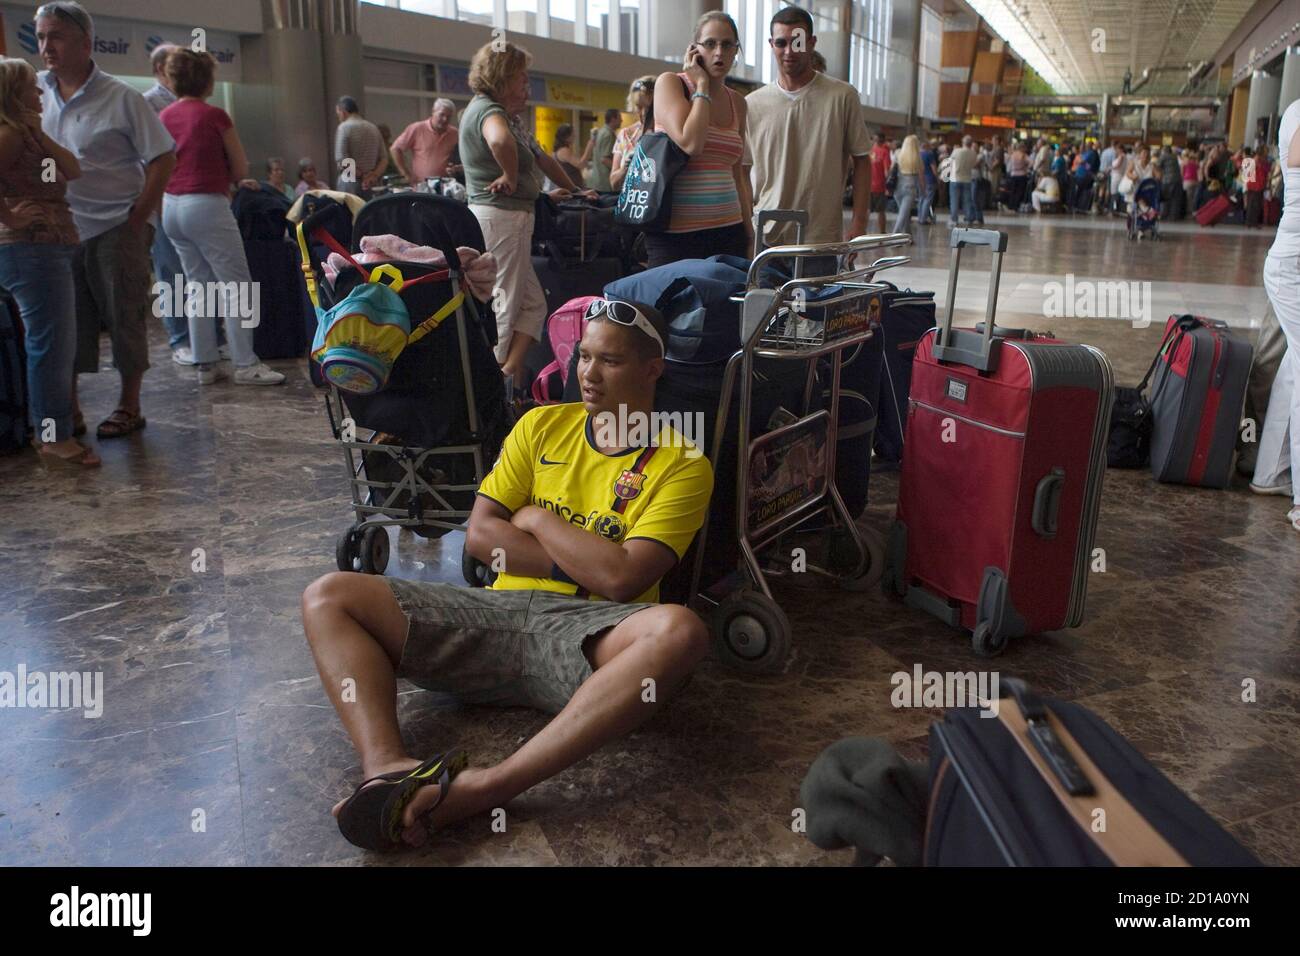 Passengers, who had an XL Airways flight cancelled, wait for news at the  airport in Tenerife in Spain's Canary Islands September 12, 2008. Britain's  third largest package holiday operator, XL Leisure Group,